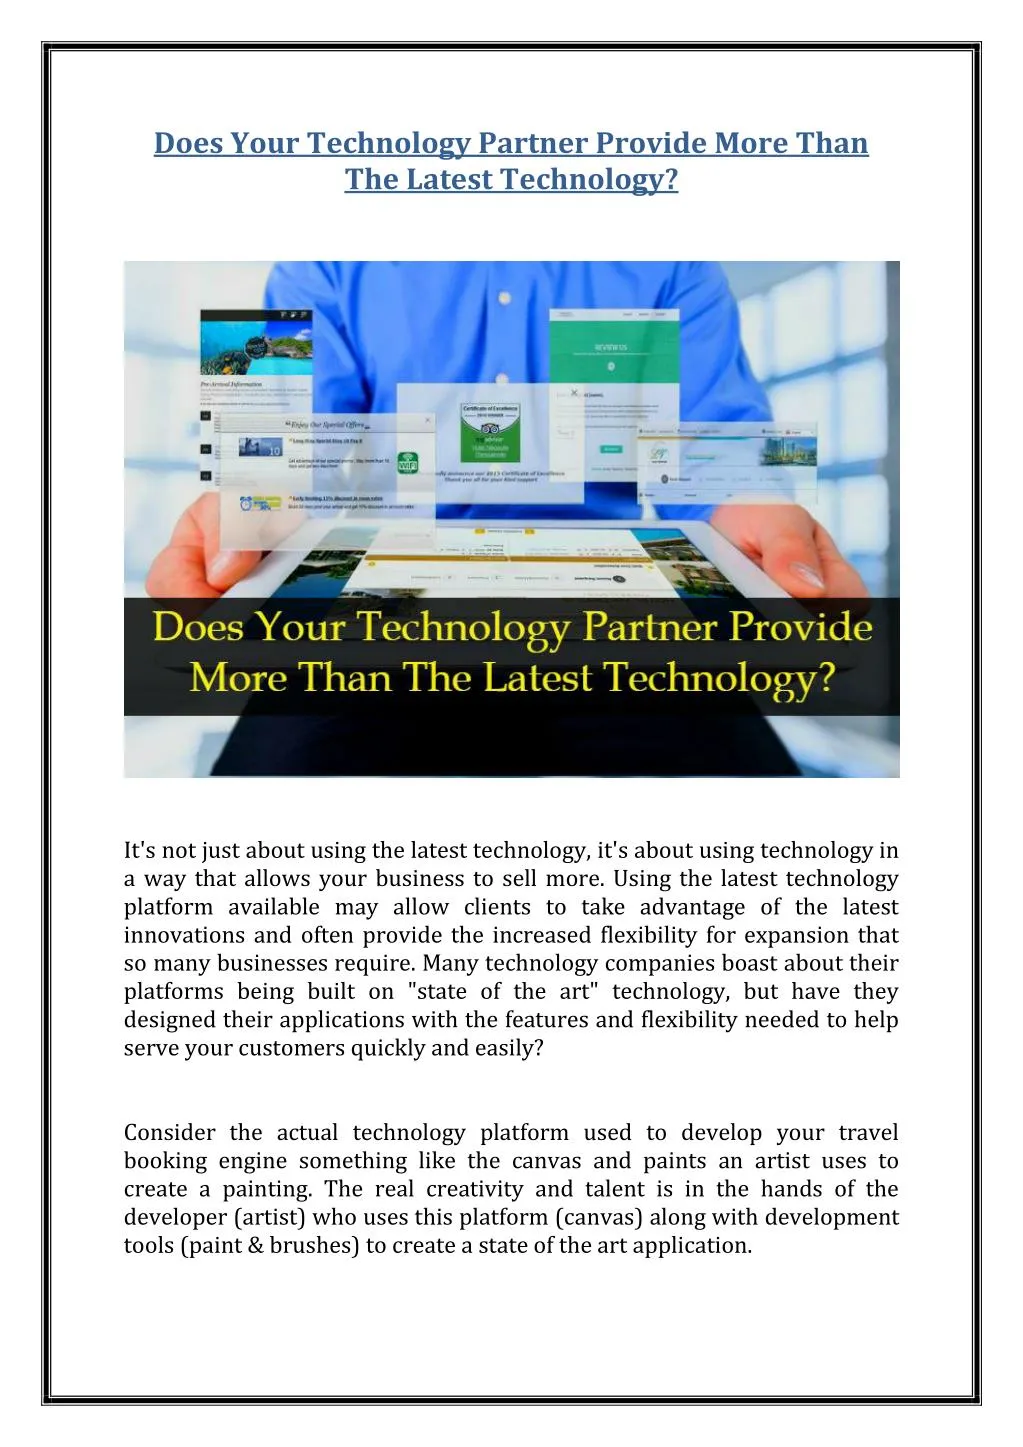 does your technology partner provide more than